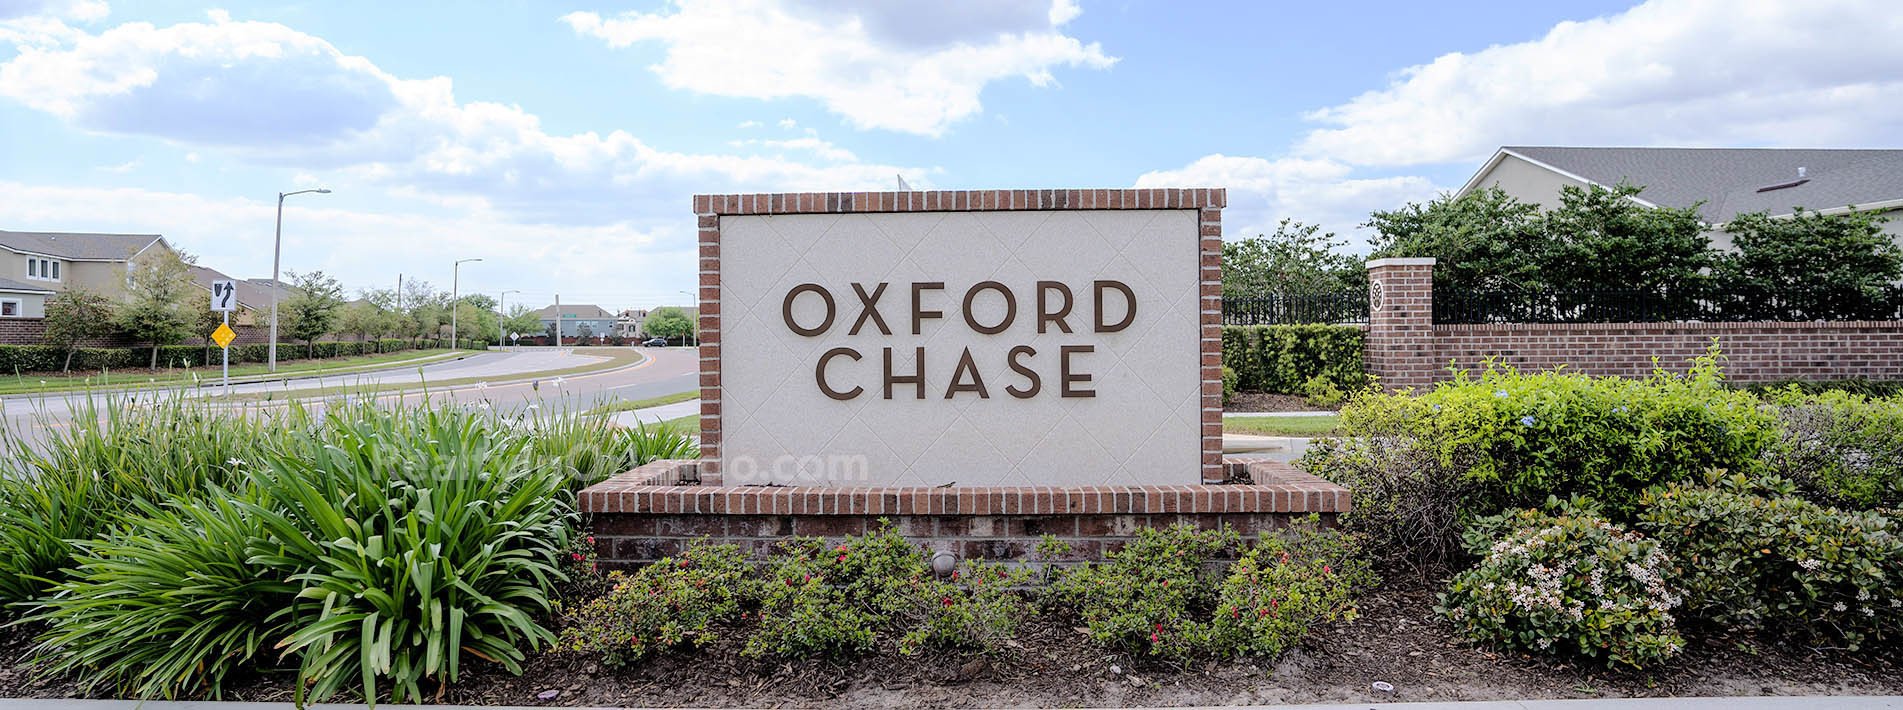 Oxford Chase Real Estate